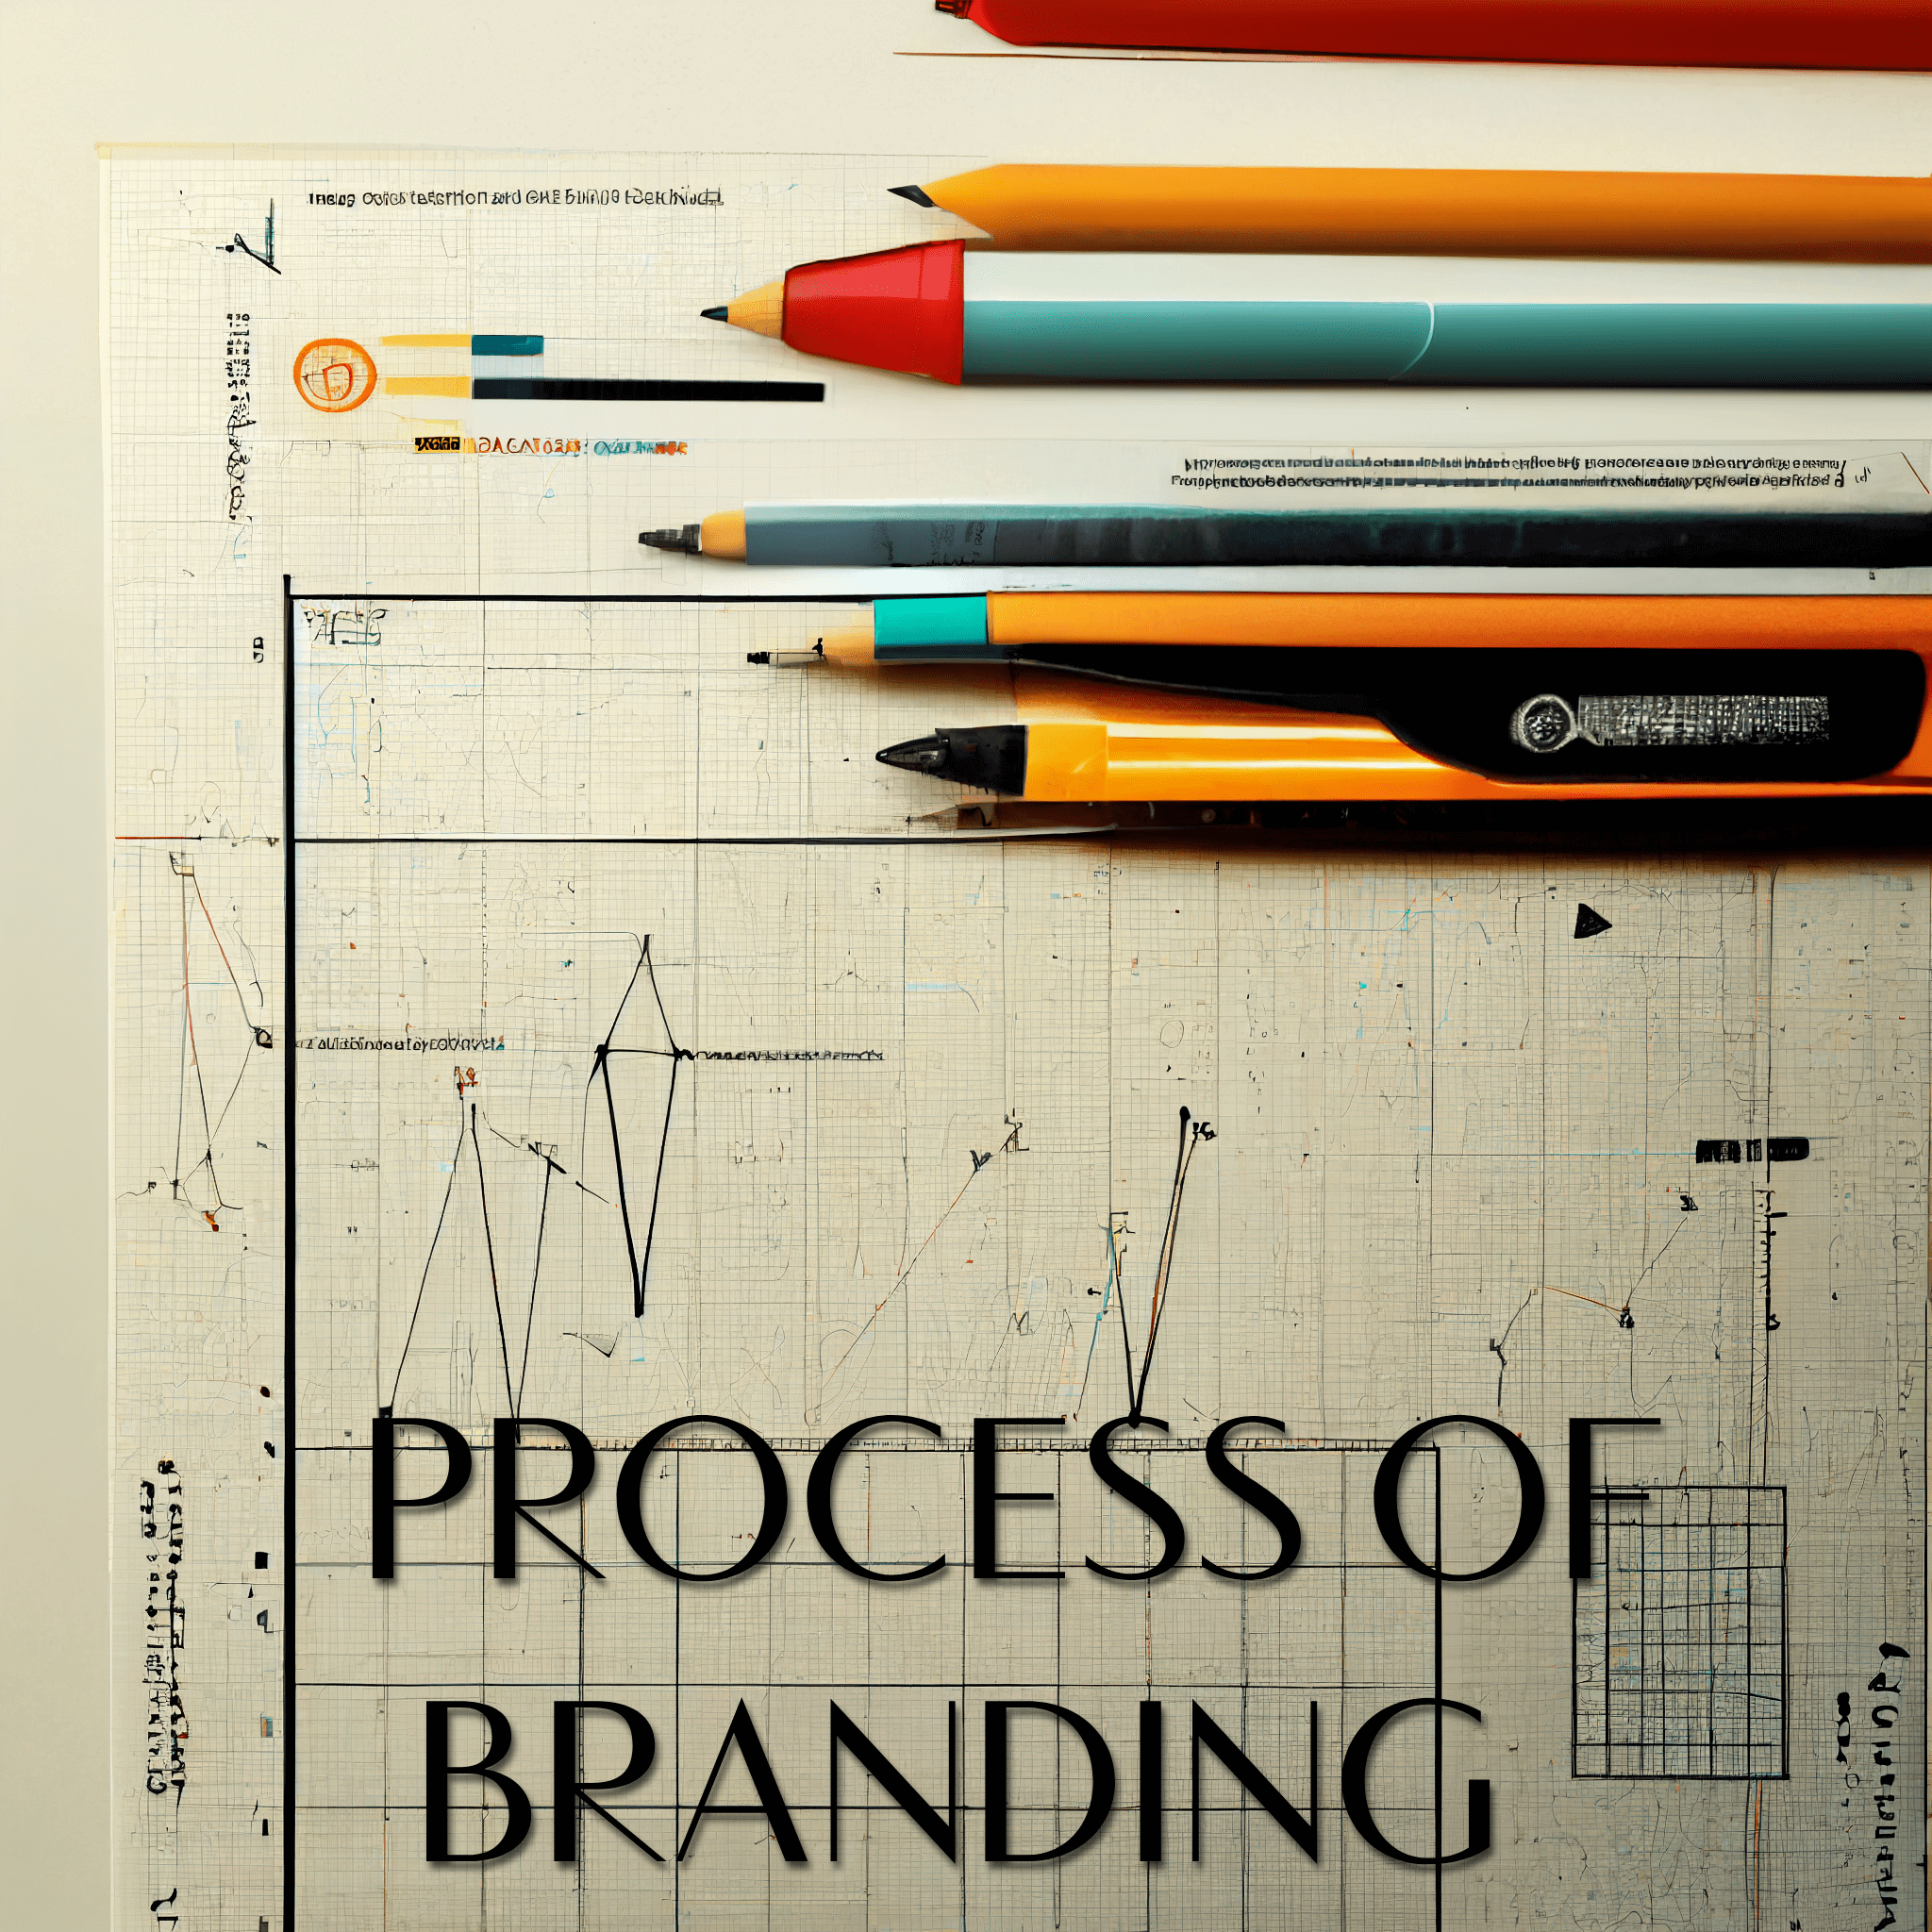 What is the Process of Branding?